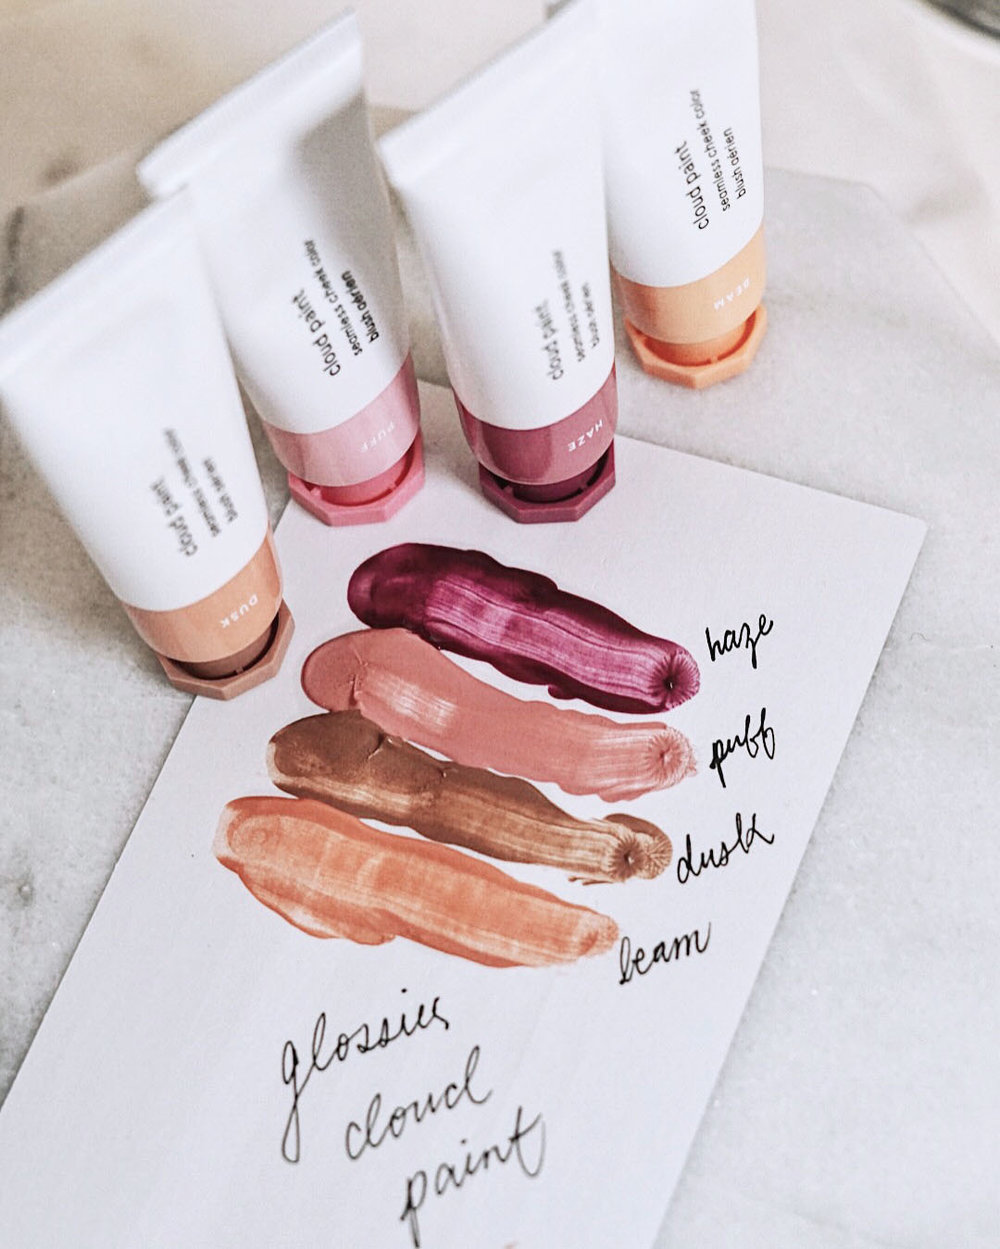 Glossier Cloud Paint Review + Swatches — c i n d y h y u e